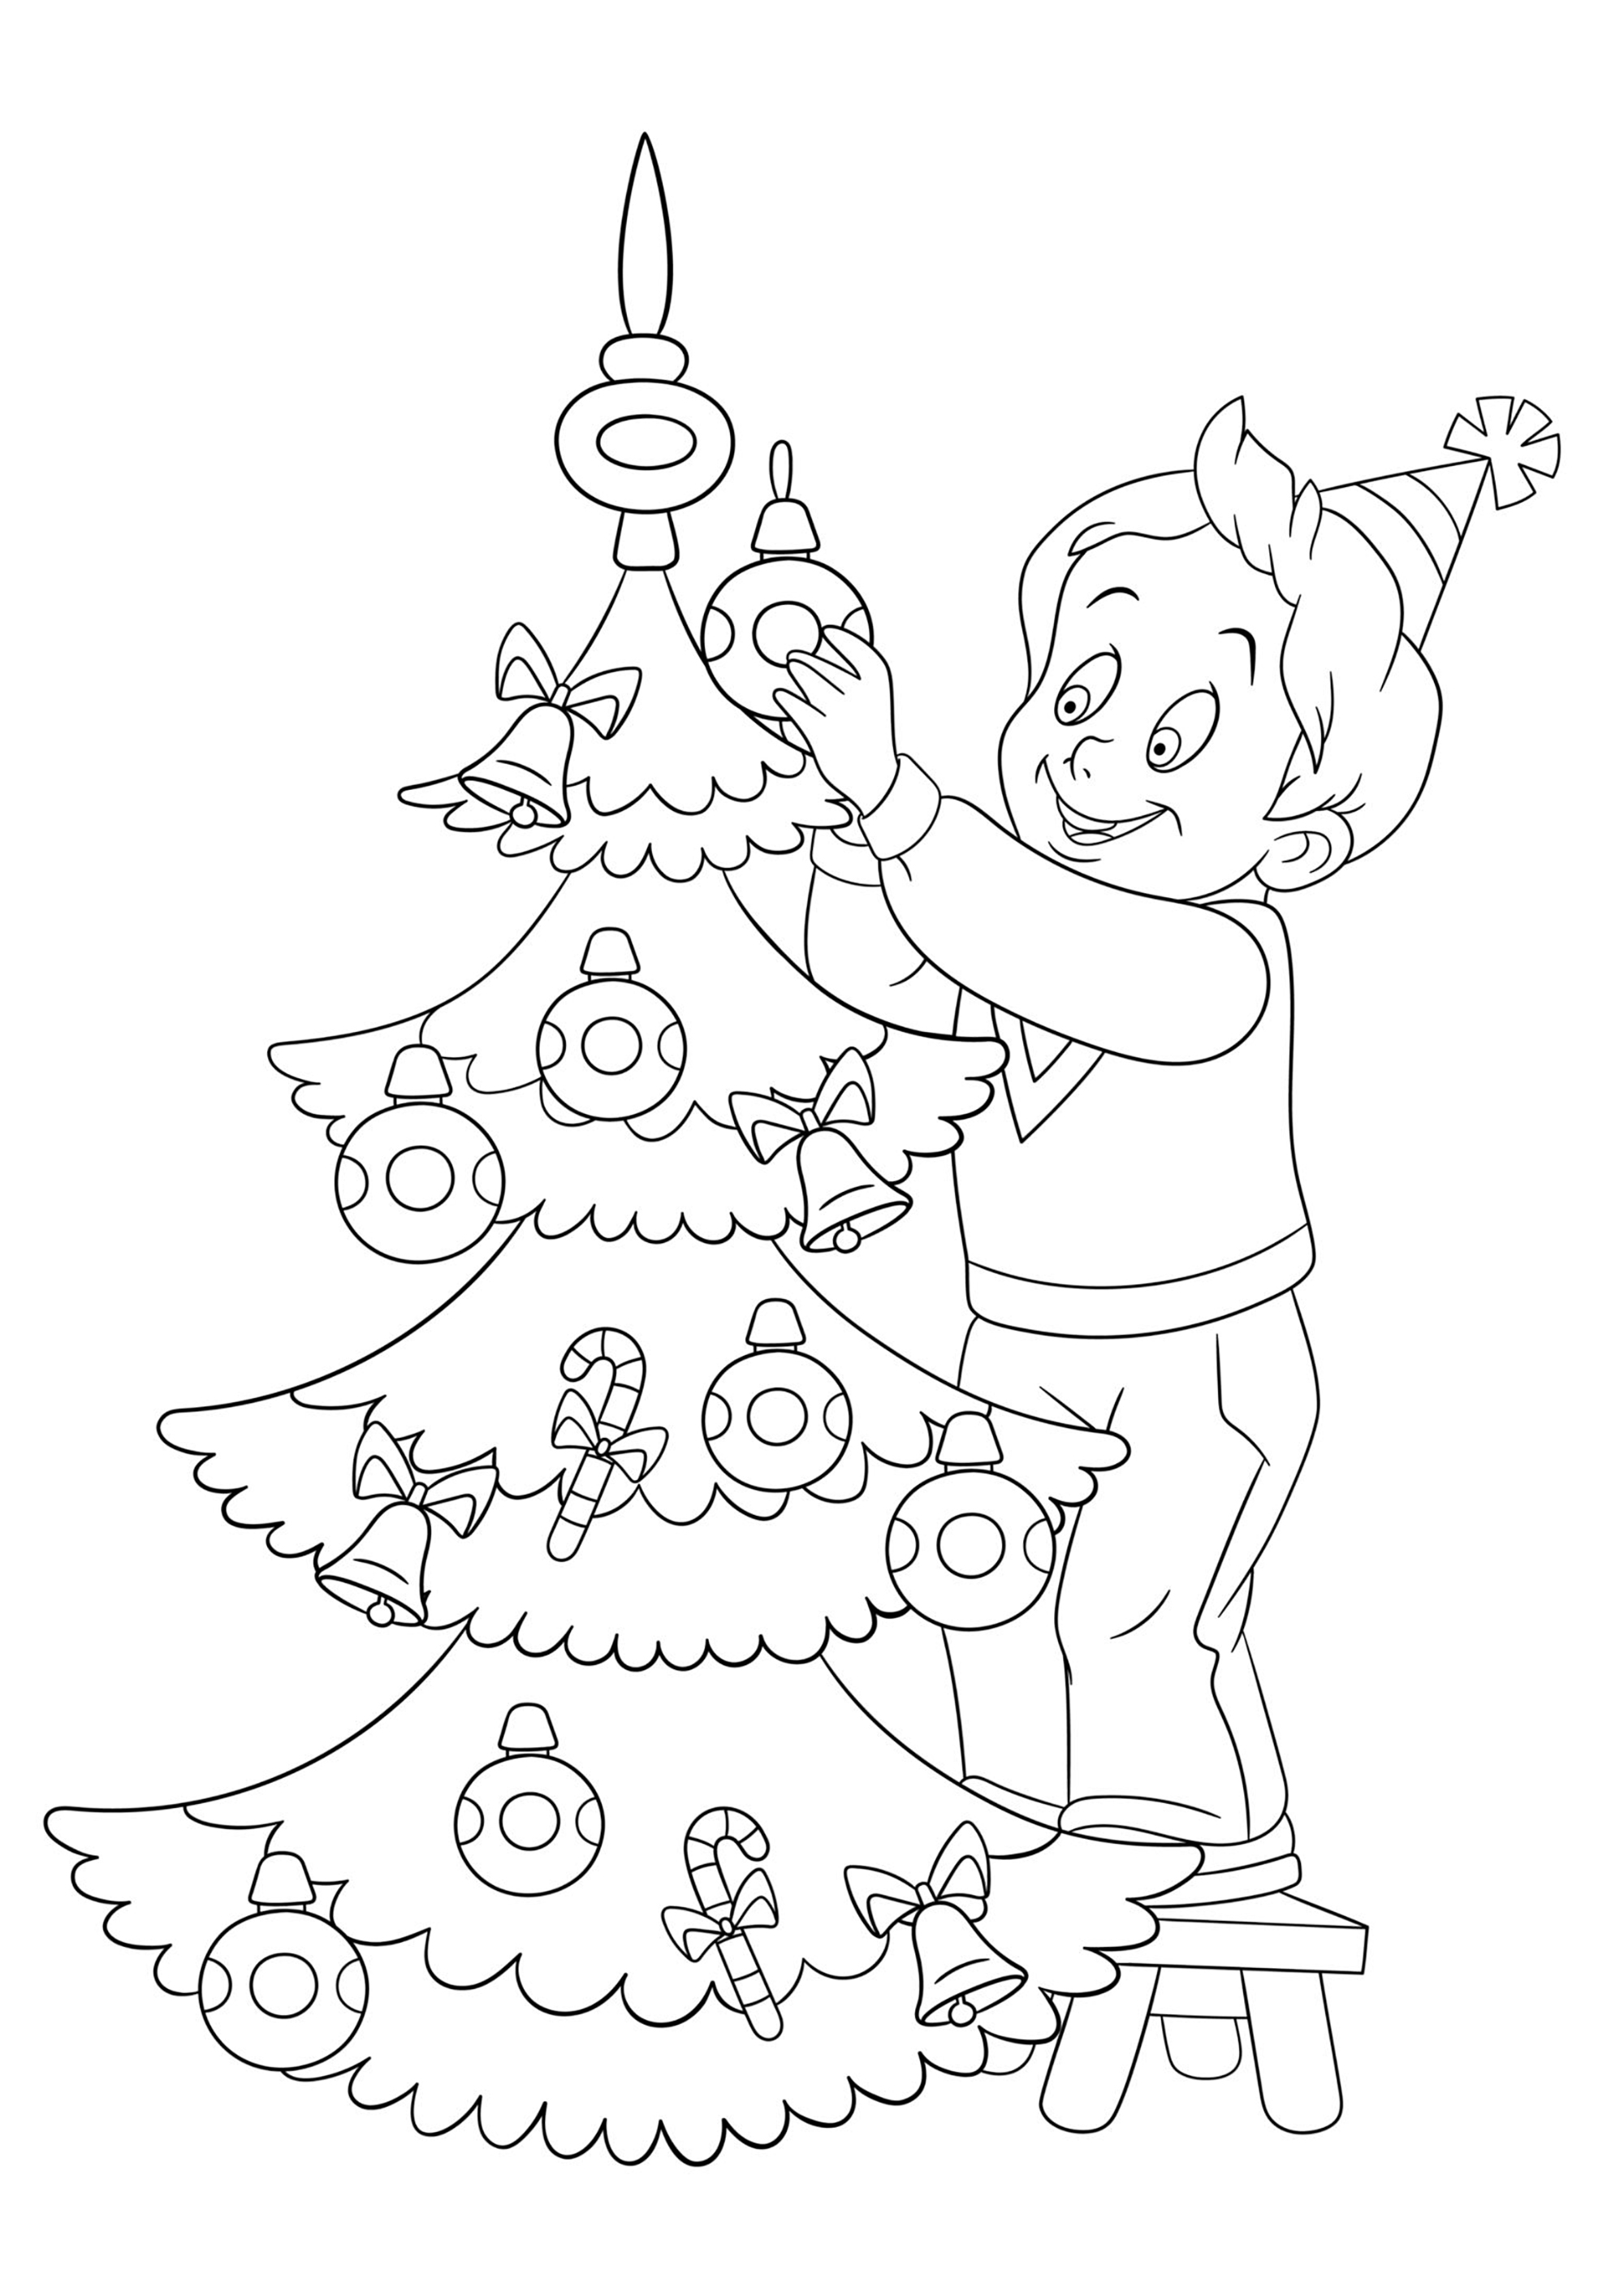 5-free-christmas-printable-coloring-pages-snowman-tree-bells